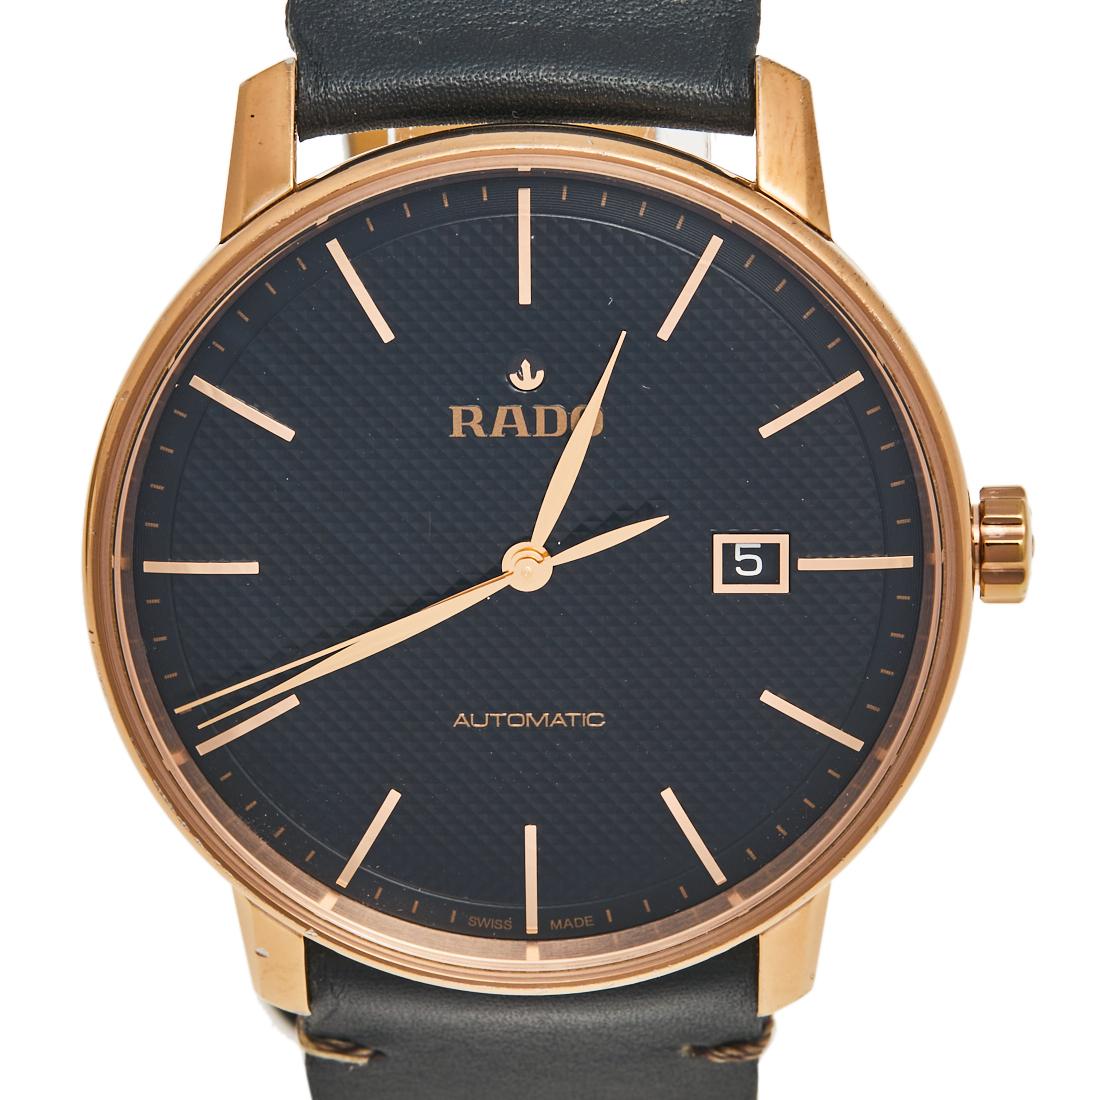 Redefine style with this exclusive Coupole wristwatch from the house of Rado. The round dial houses three hands, index hour markers, and a date window. With a water resistance of up to 50 meters, this automatic watch, made from rose gold-plated